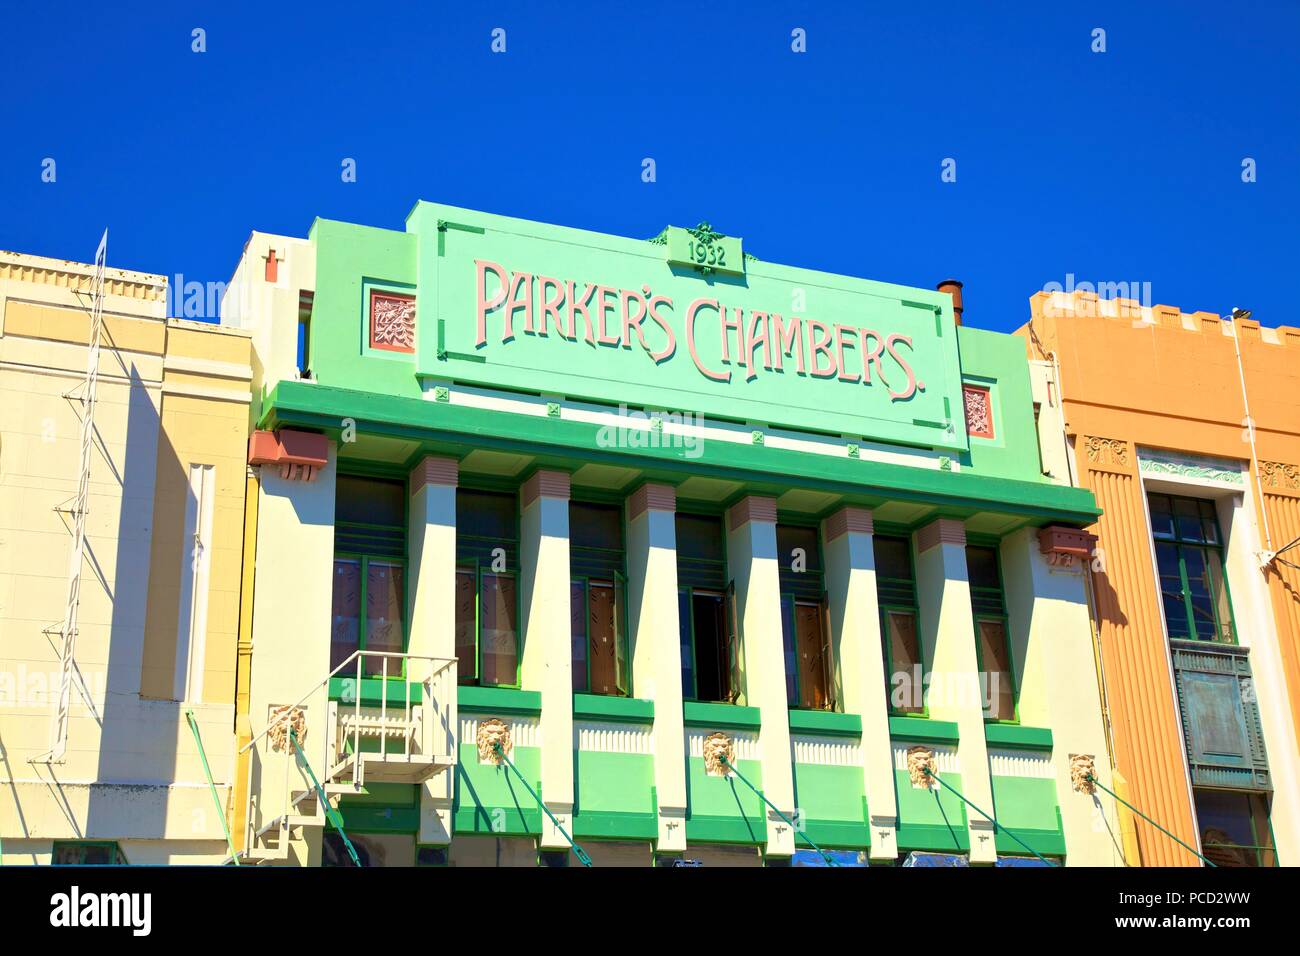 Parkers Chambers Art Deco Building, Napier, Hawkes Bay, North Island, New Zealand, Pacific Stock Photo